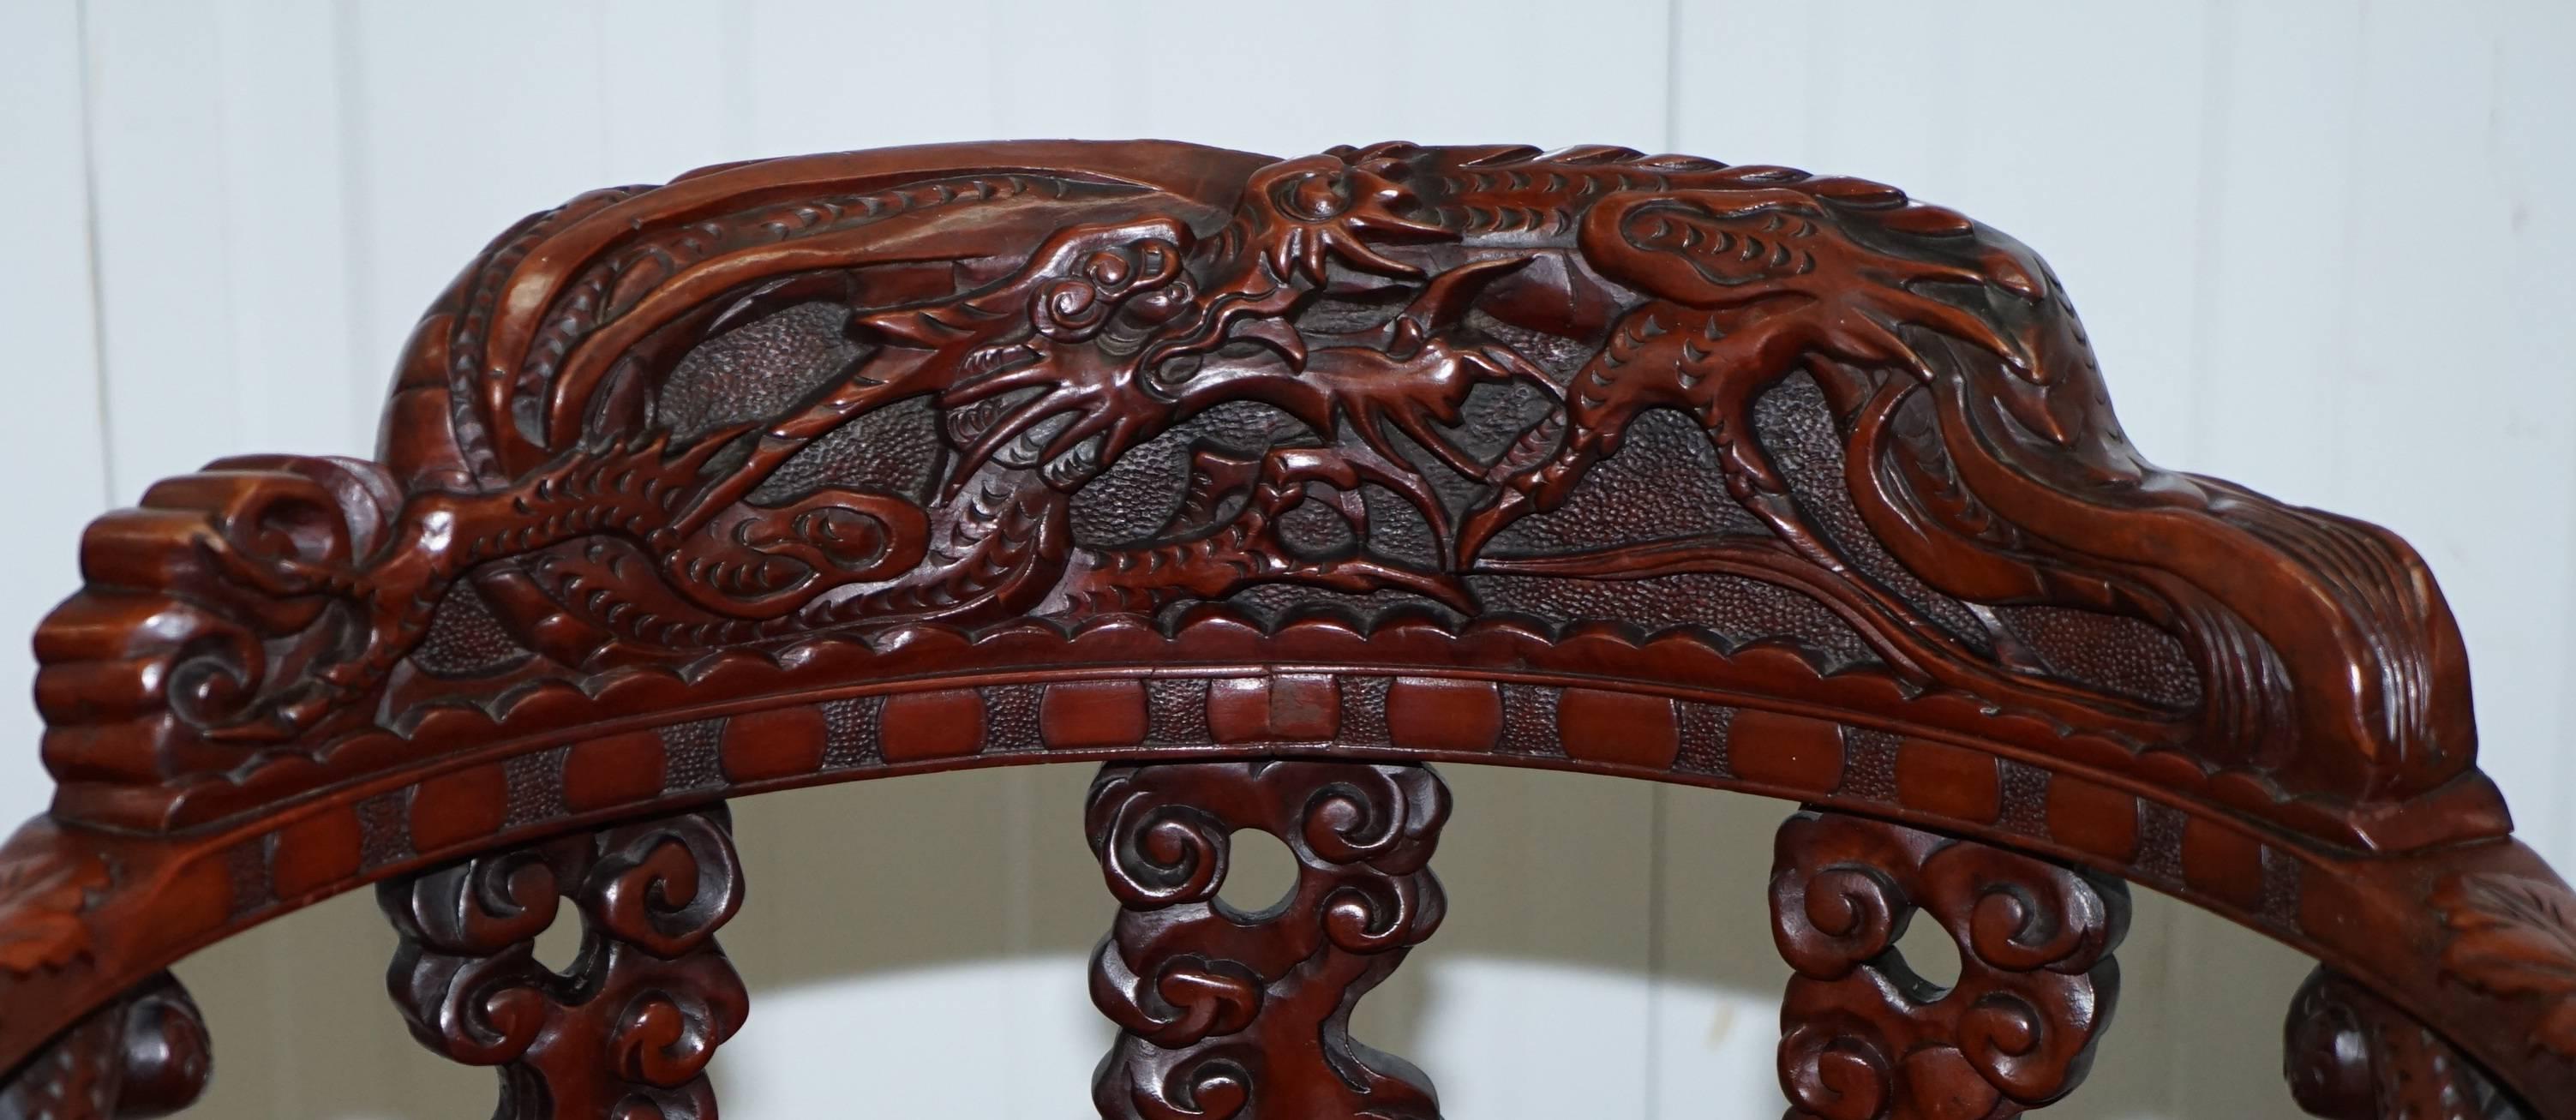 Wimbledon Furniture

We are delighted to offer for sale this stunning small rare model Qing dynasty, circa 1870 hand-carved solid rosewood dragon and lion foo dog throne armchair

Please note the delivery fee is just a guide, for an accurate